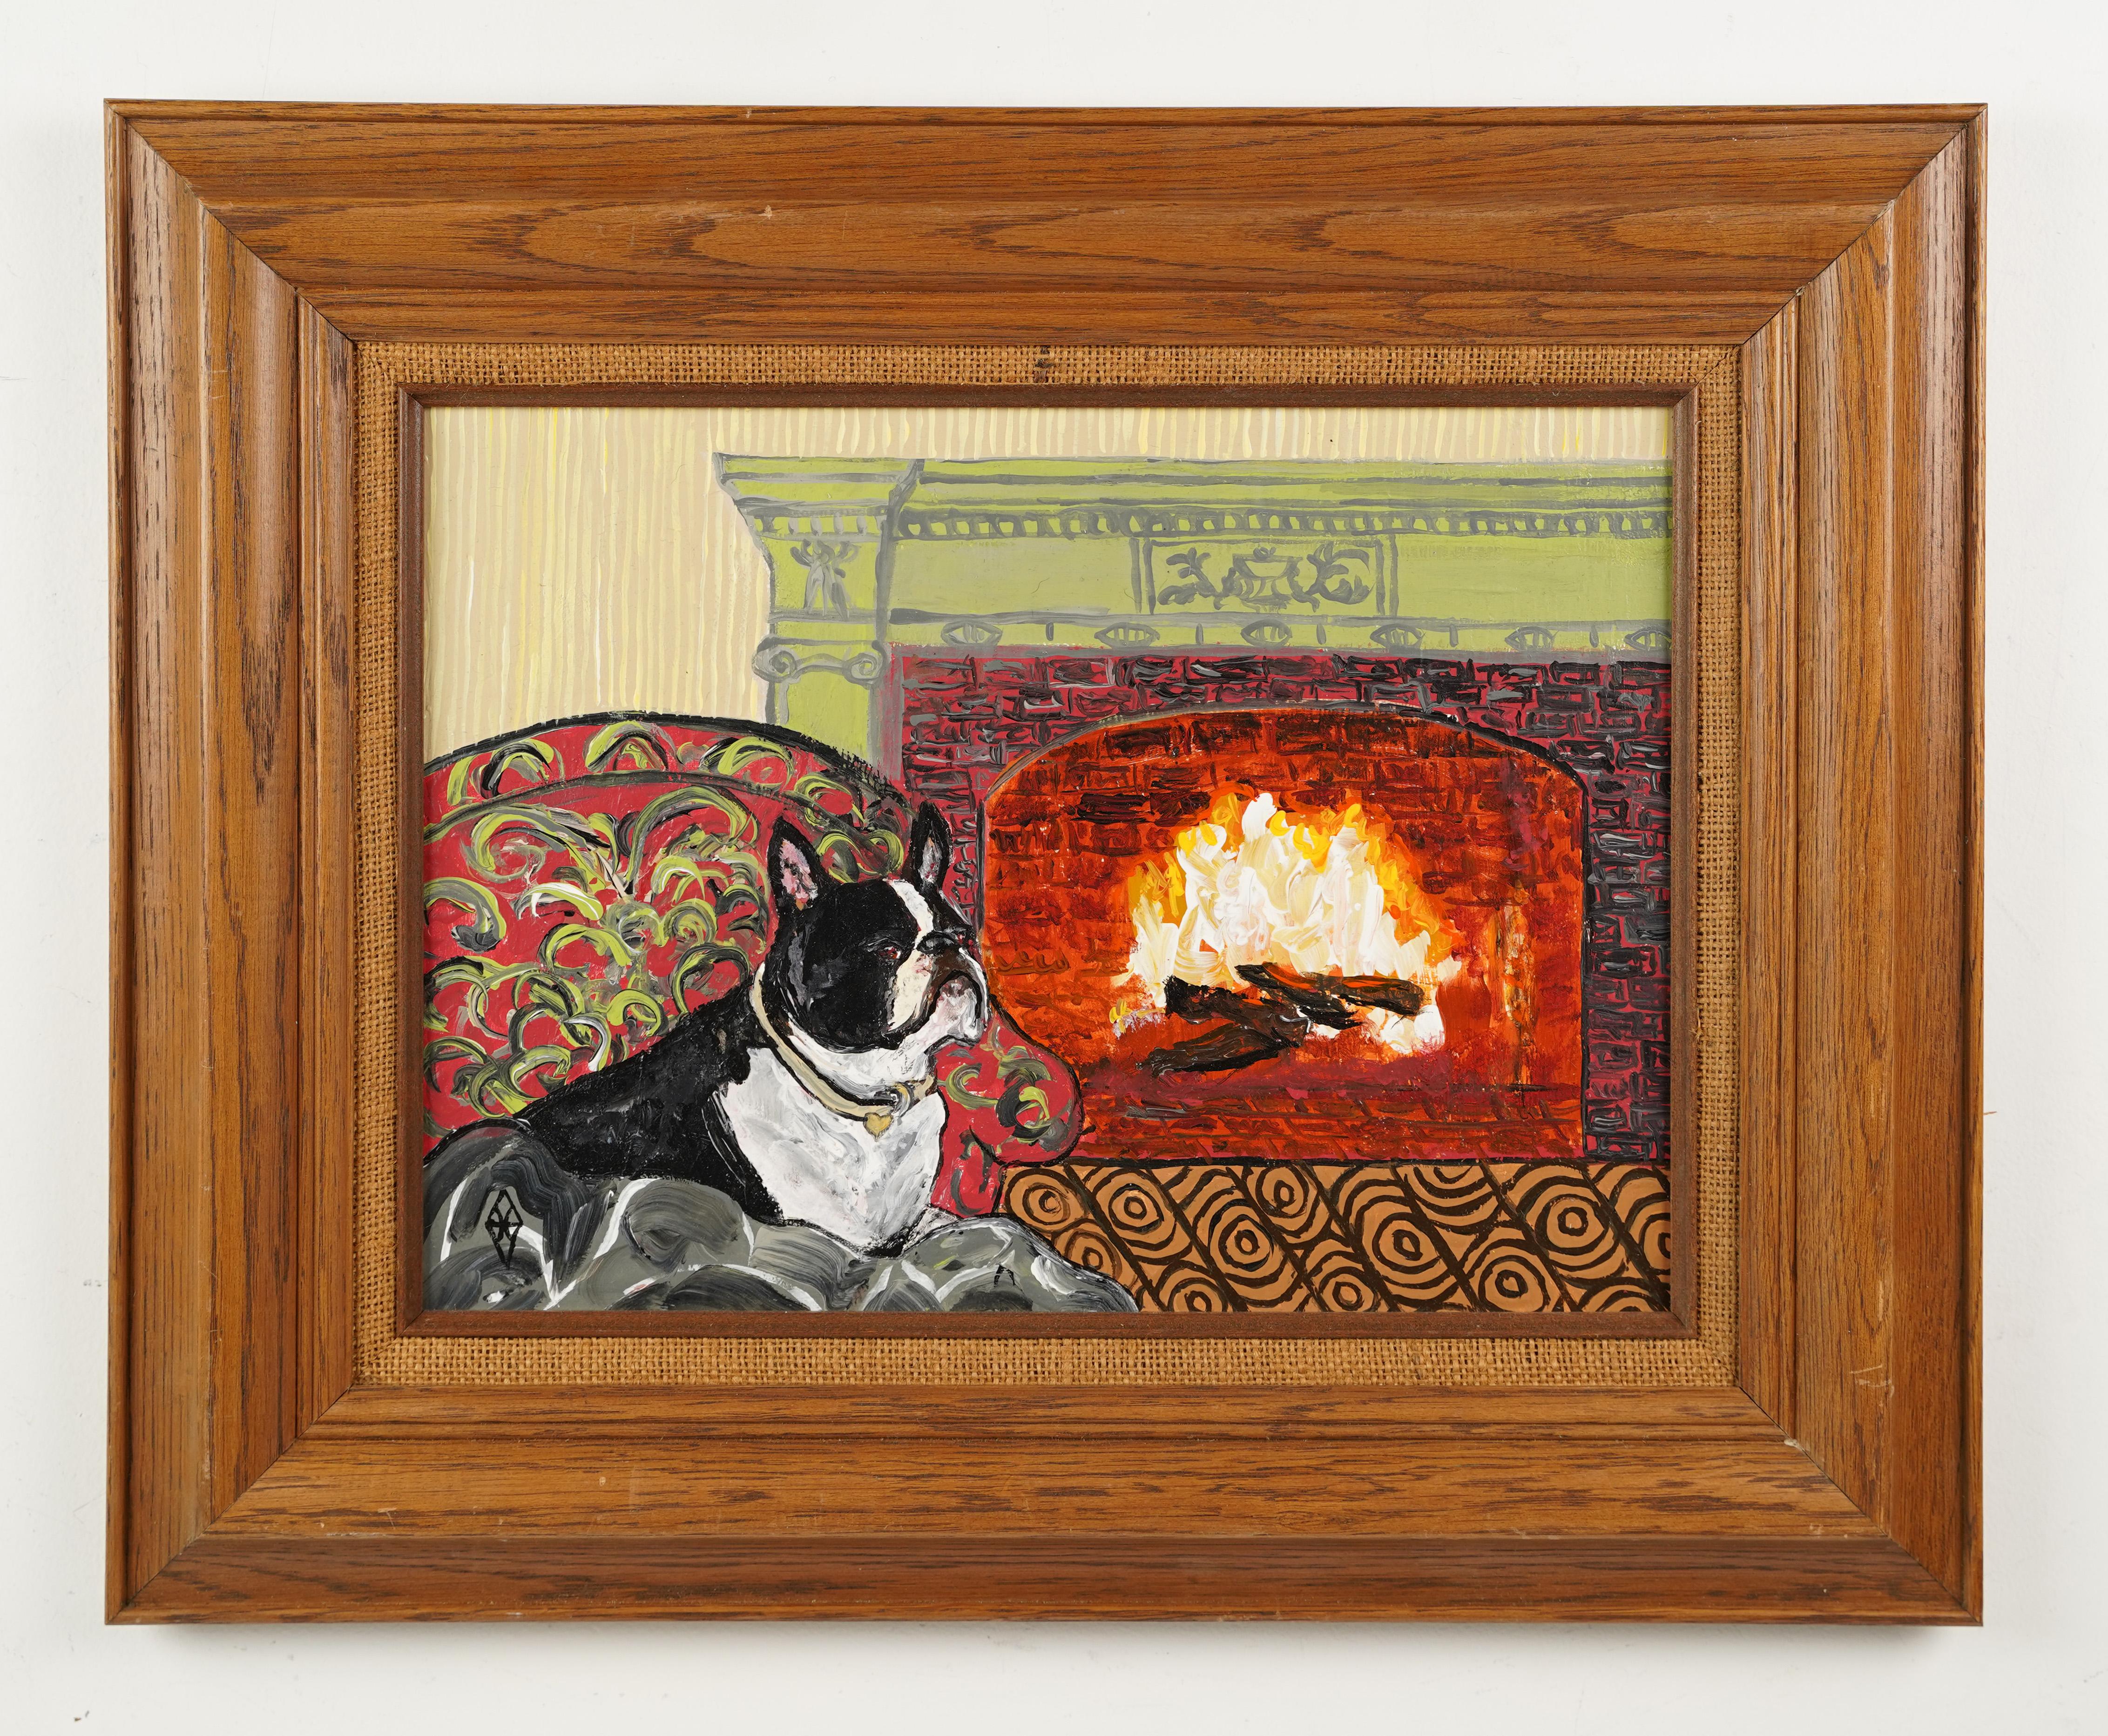 Signed American Modernist Interior French Bulldog Fireplace Portrait Painting 1